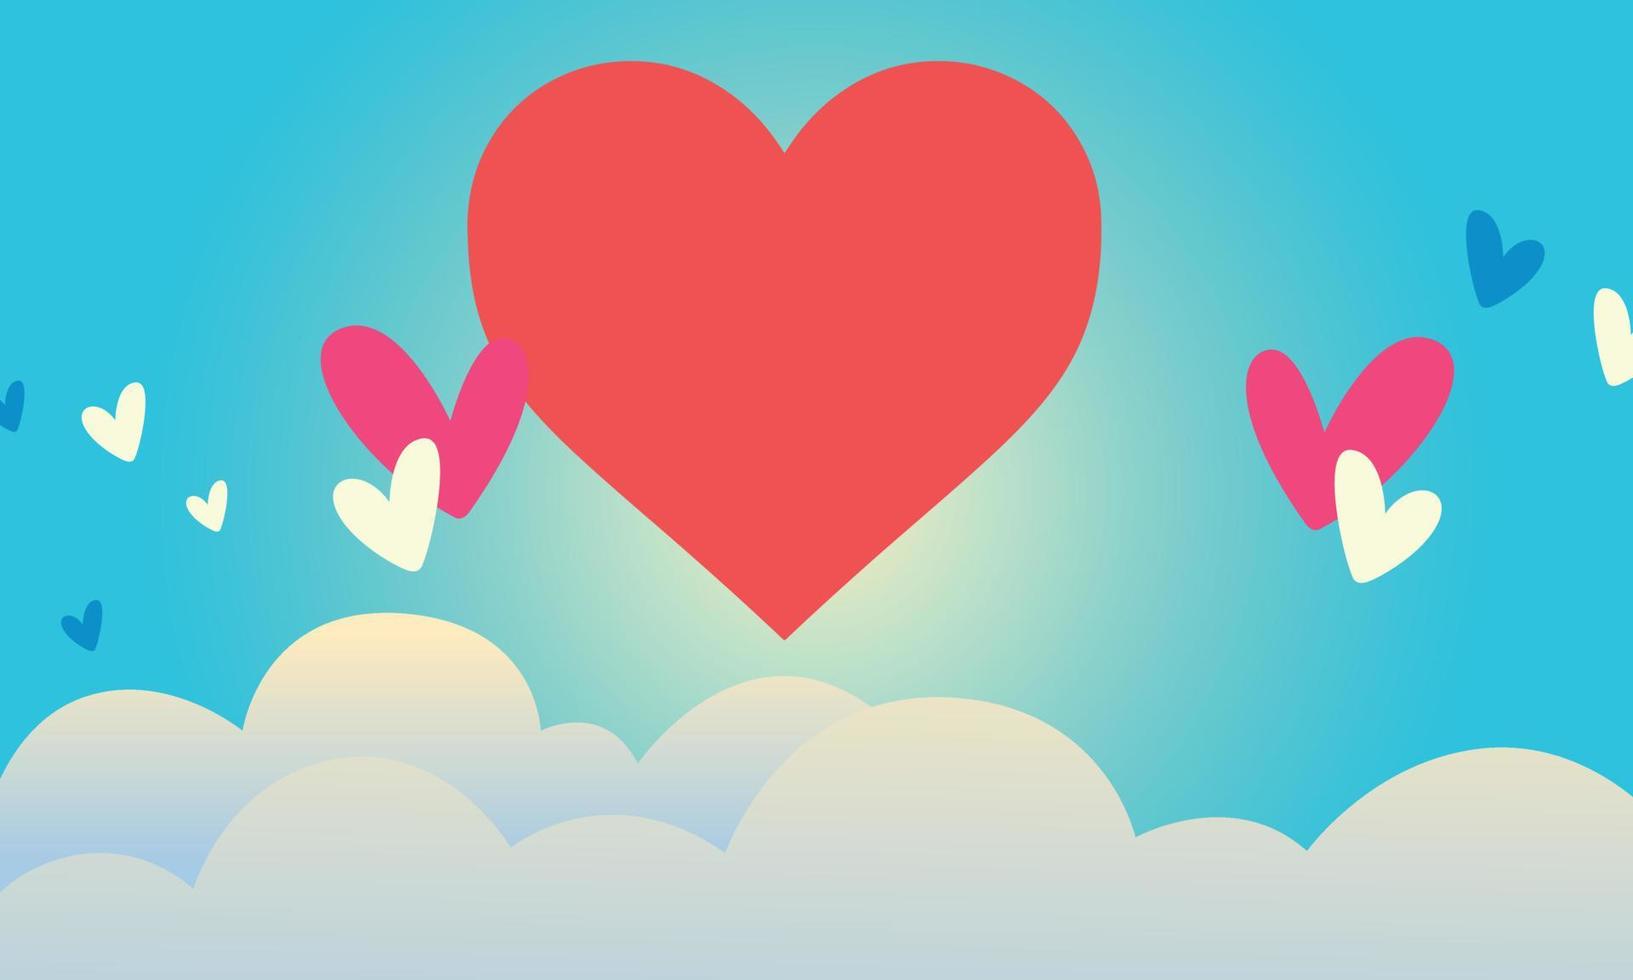 Romantic background with hearts, valentines day vector